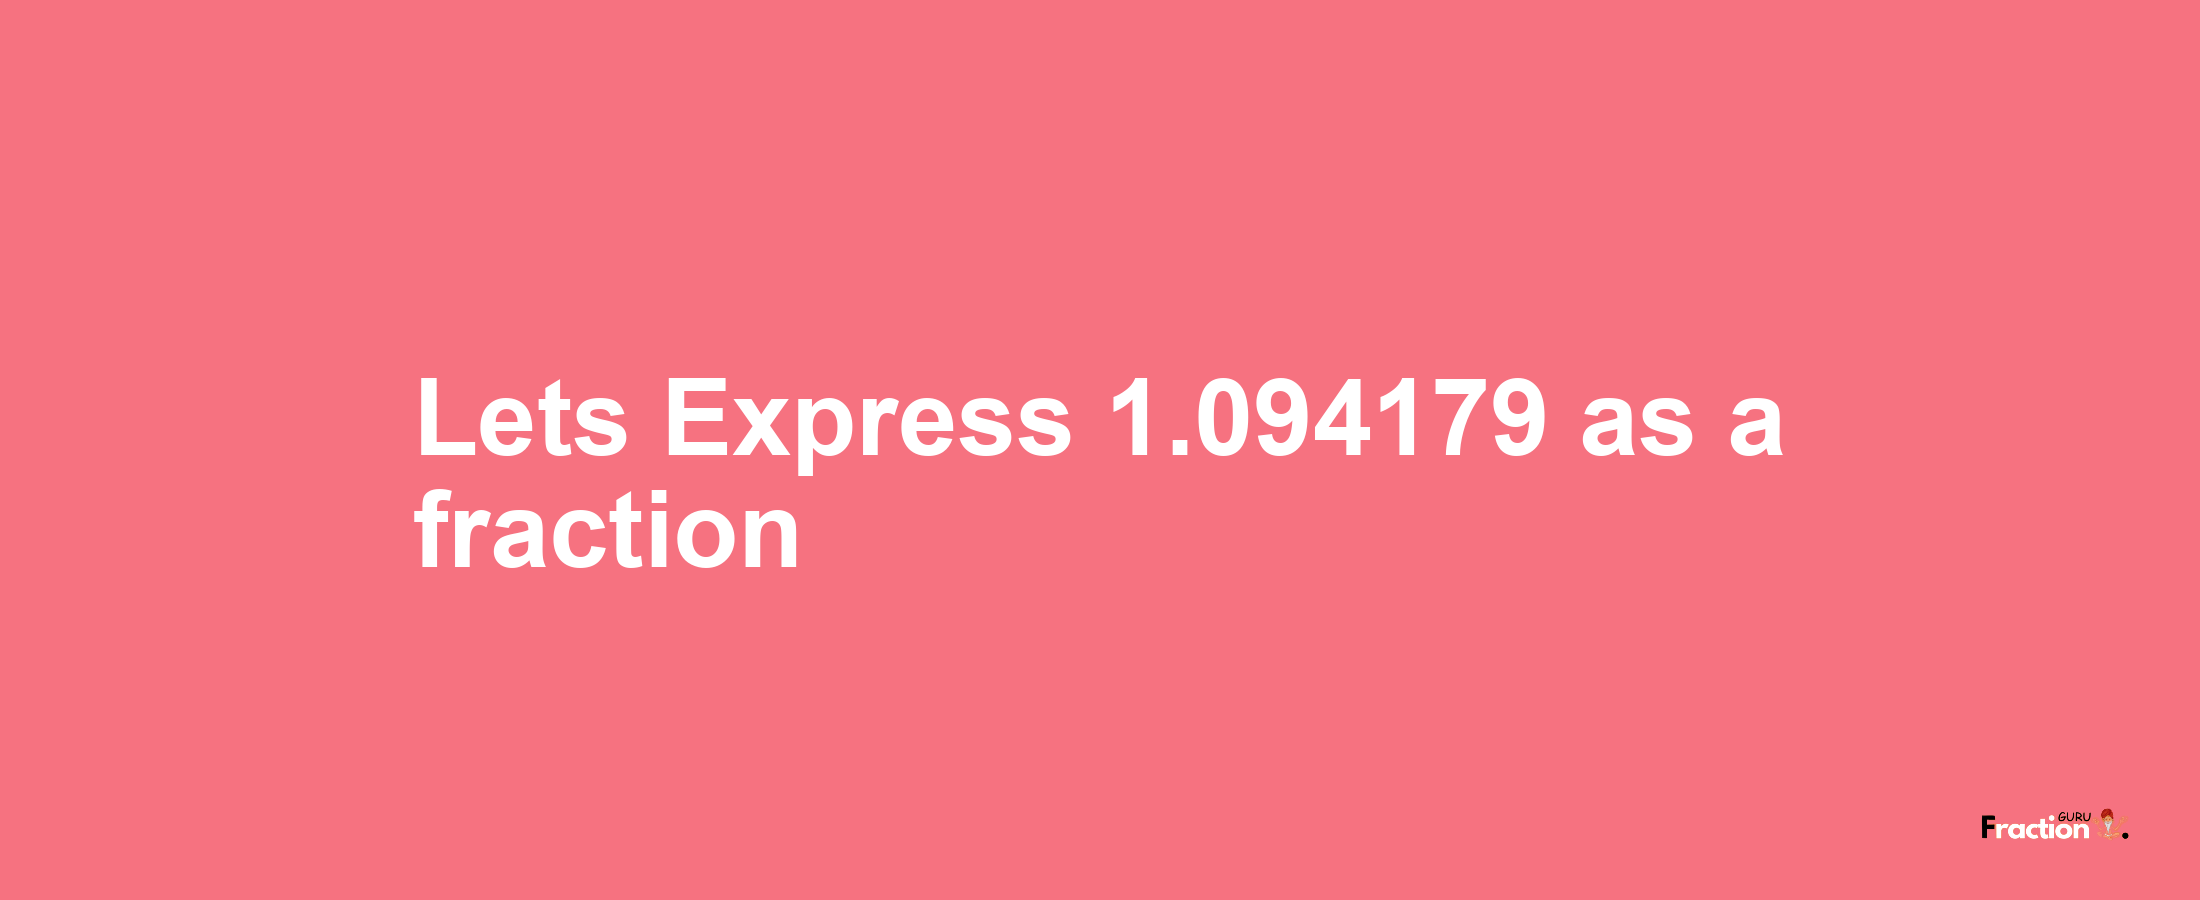 Lets Express 1.094179 as afraction